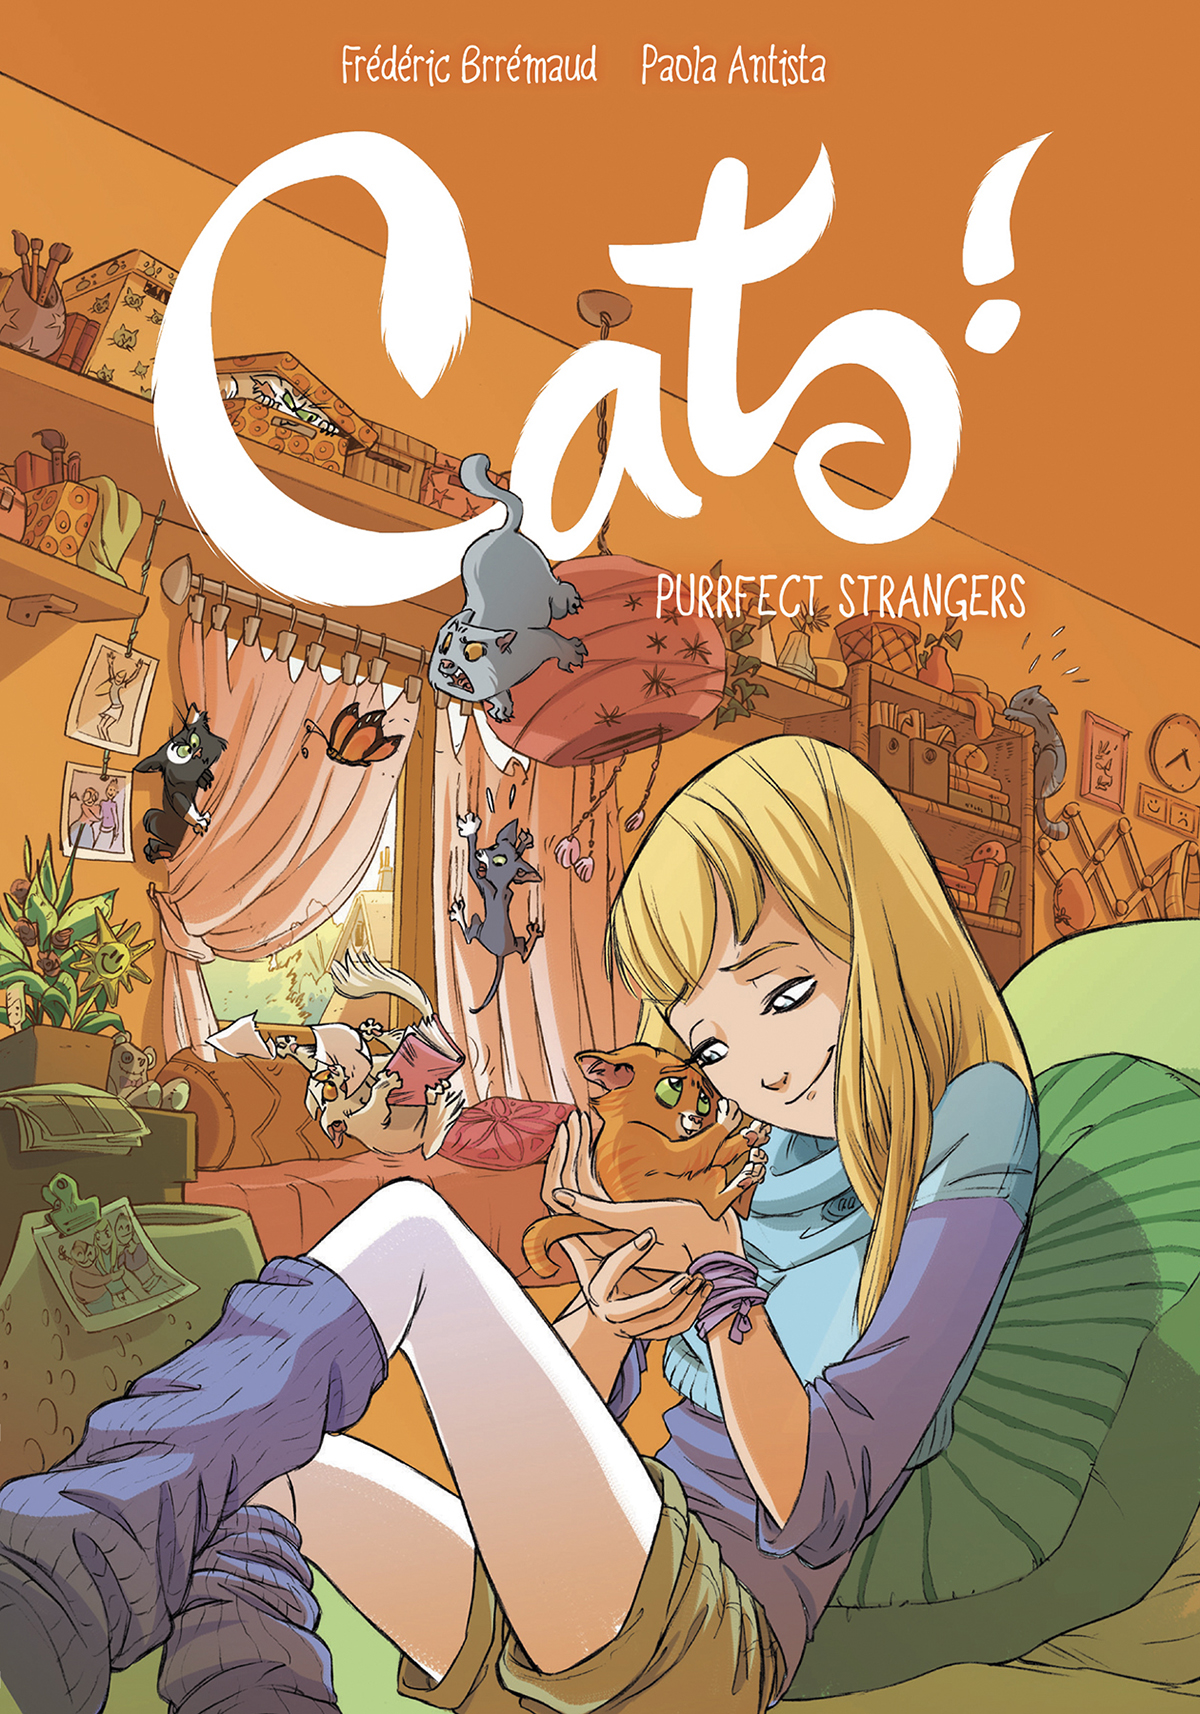 Cats Purrfect Strangers Graphic Novel